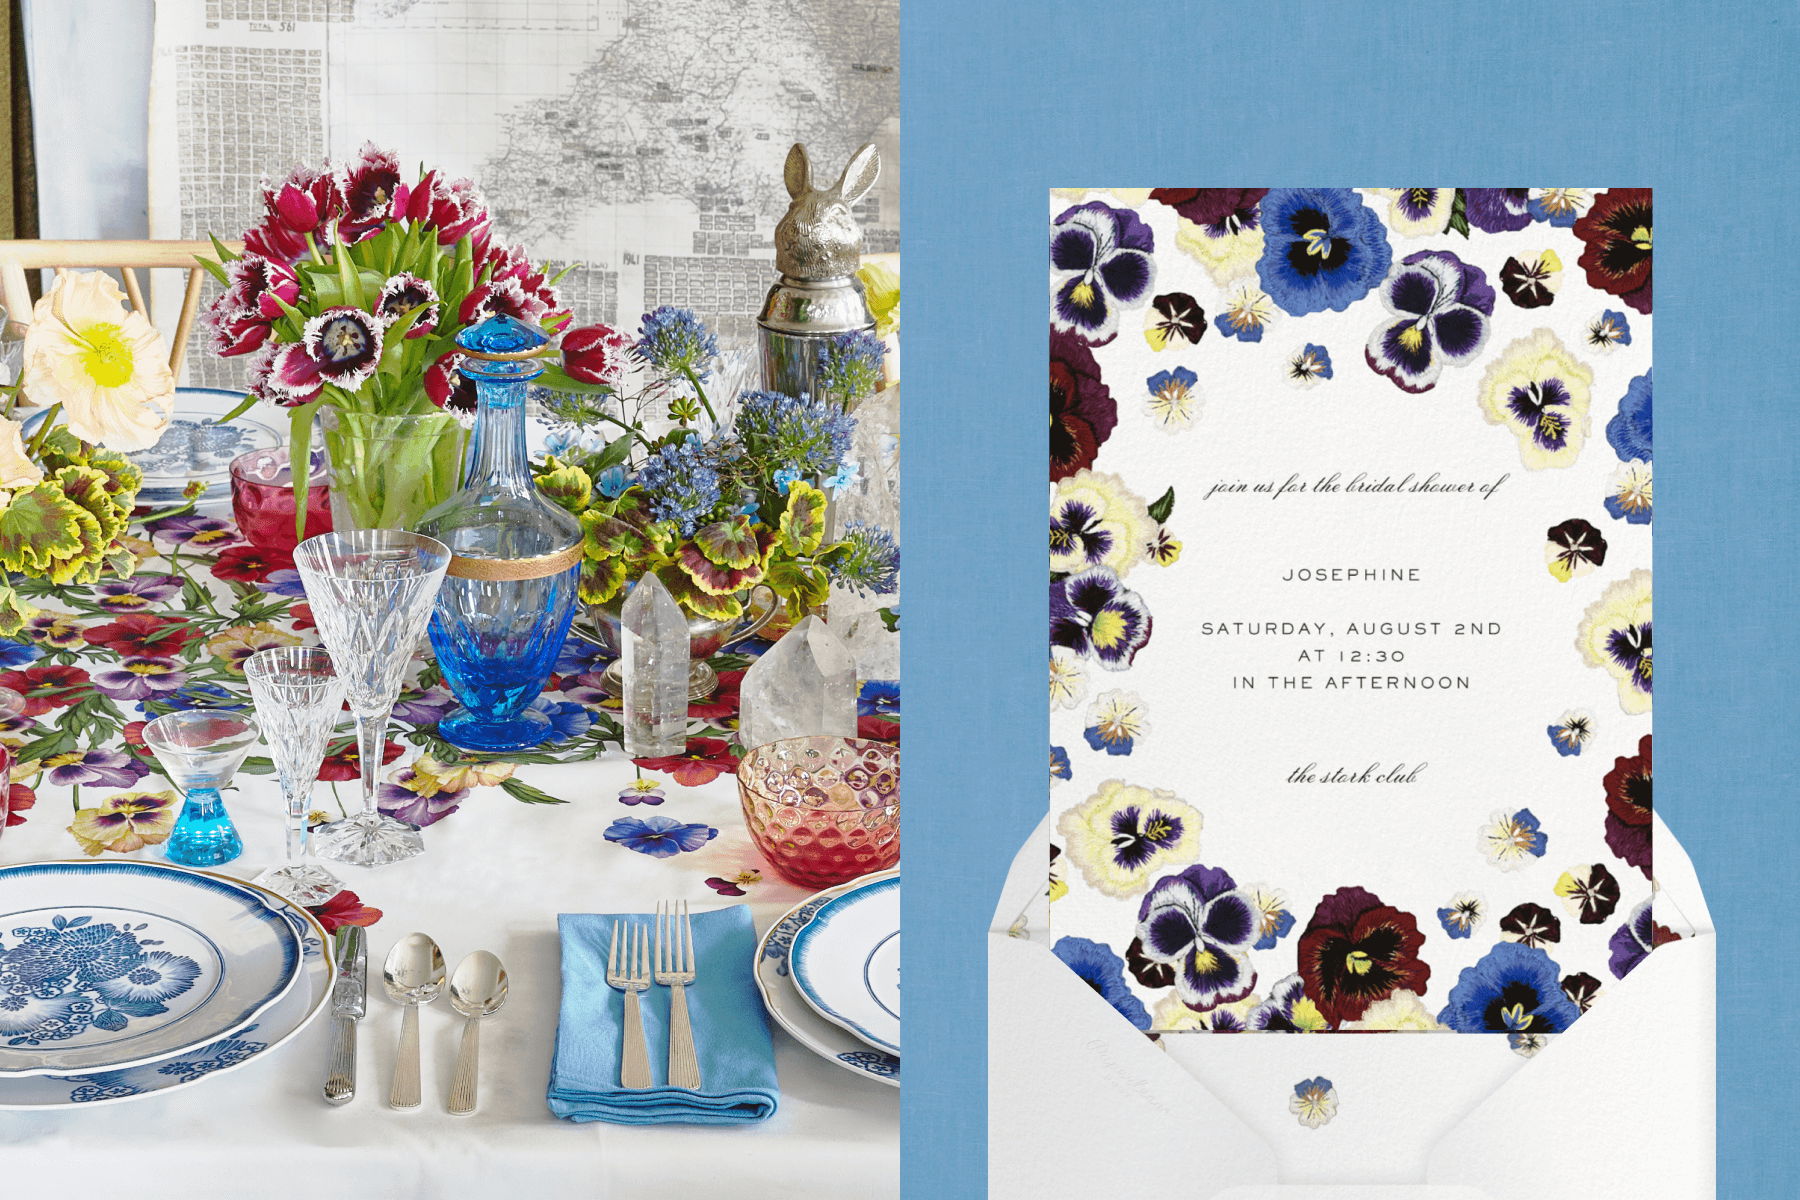 Left: A table set for a bridal luncheon with colorful flowers, white tablecloth, crystalware and a silver bunny statue. Right: A white bridal luncheon invitation framed by blue, purple and maroon pansies. 